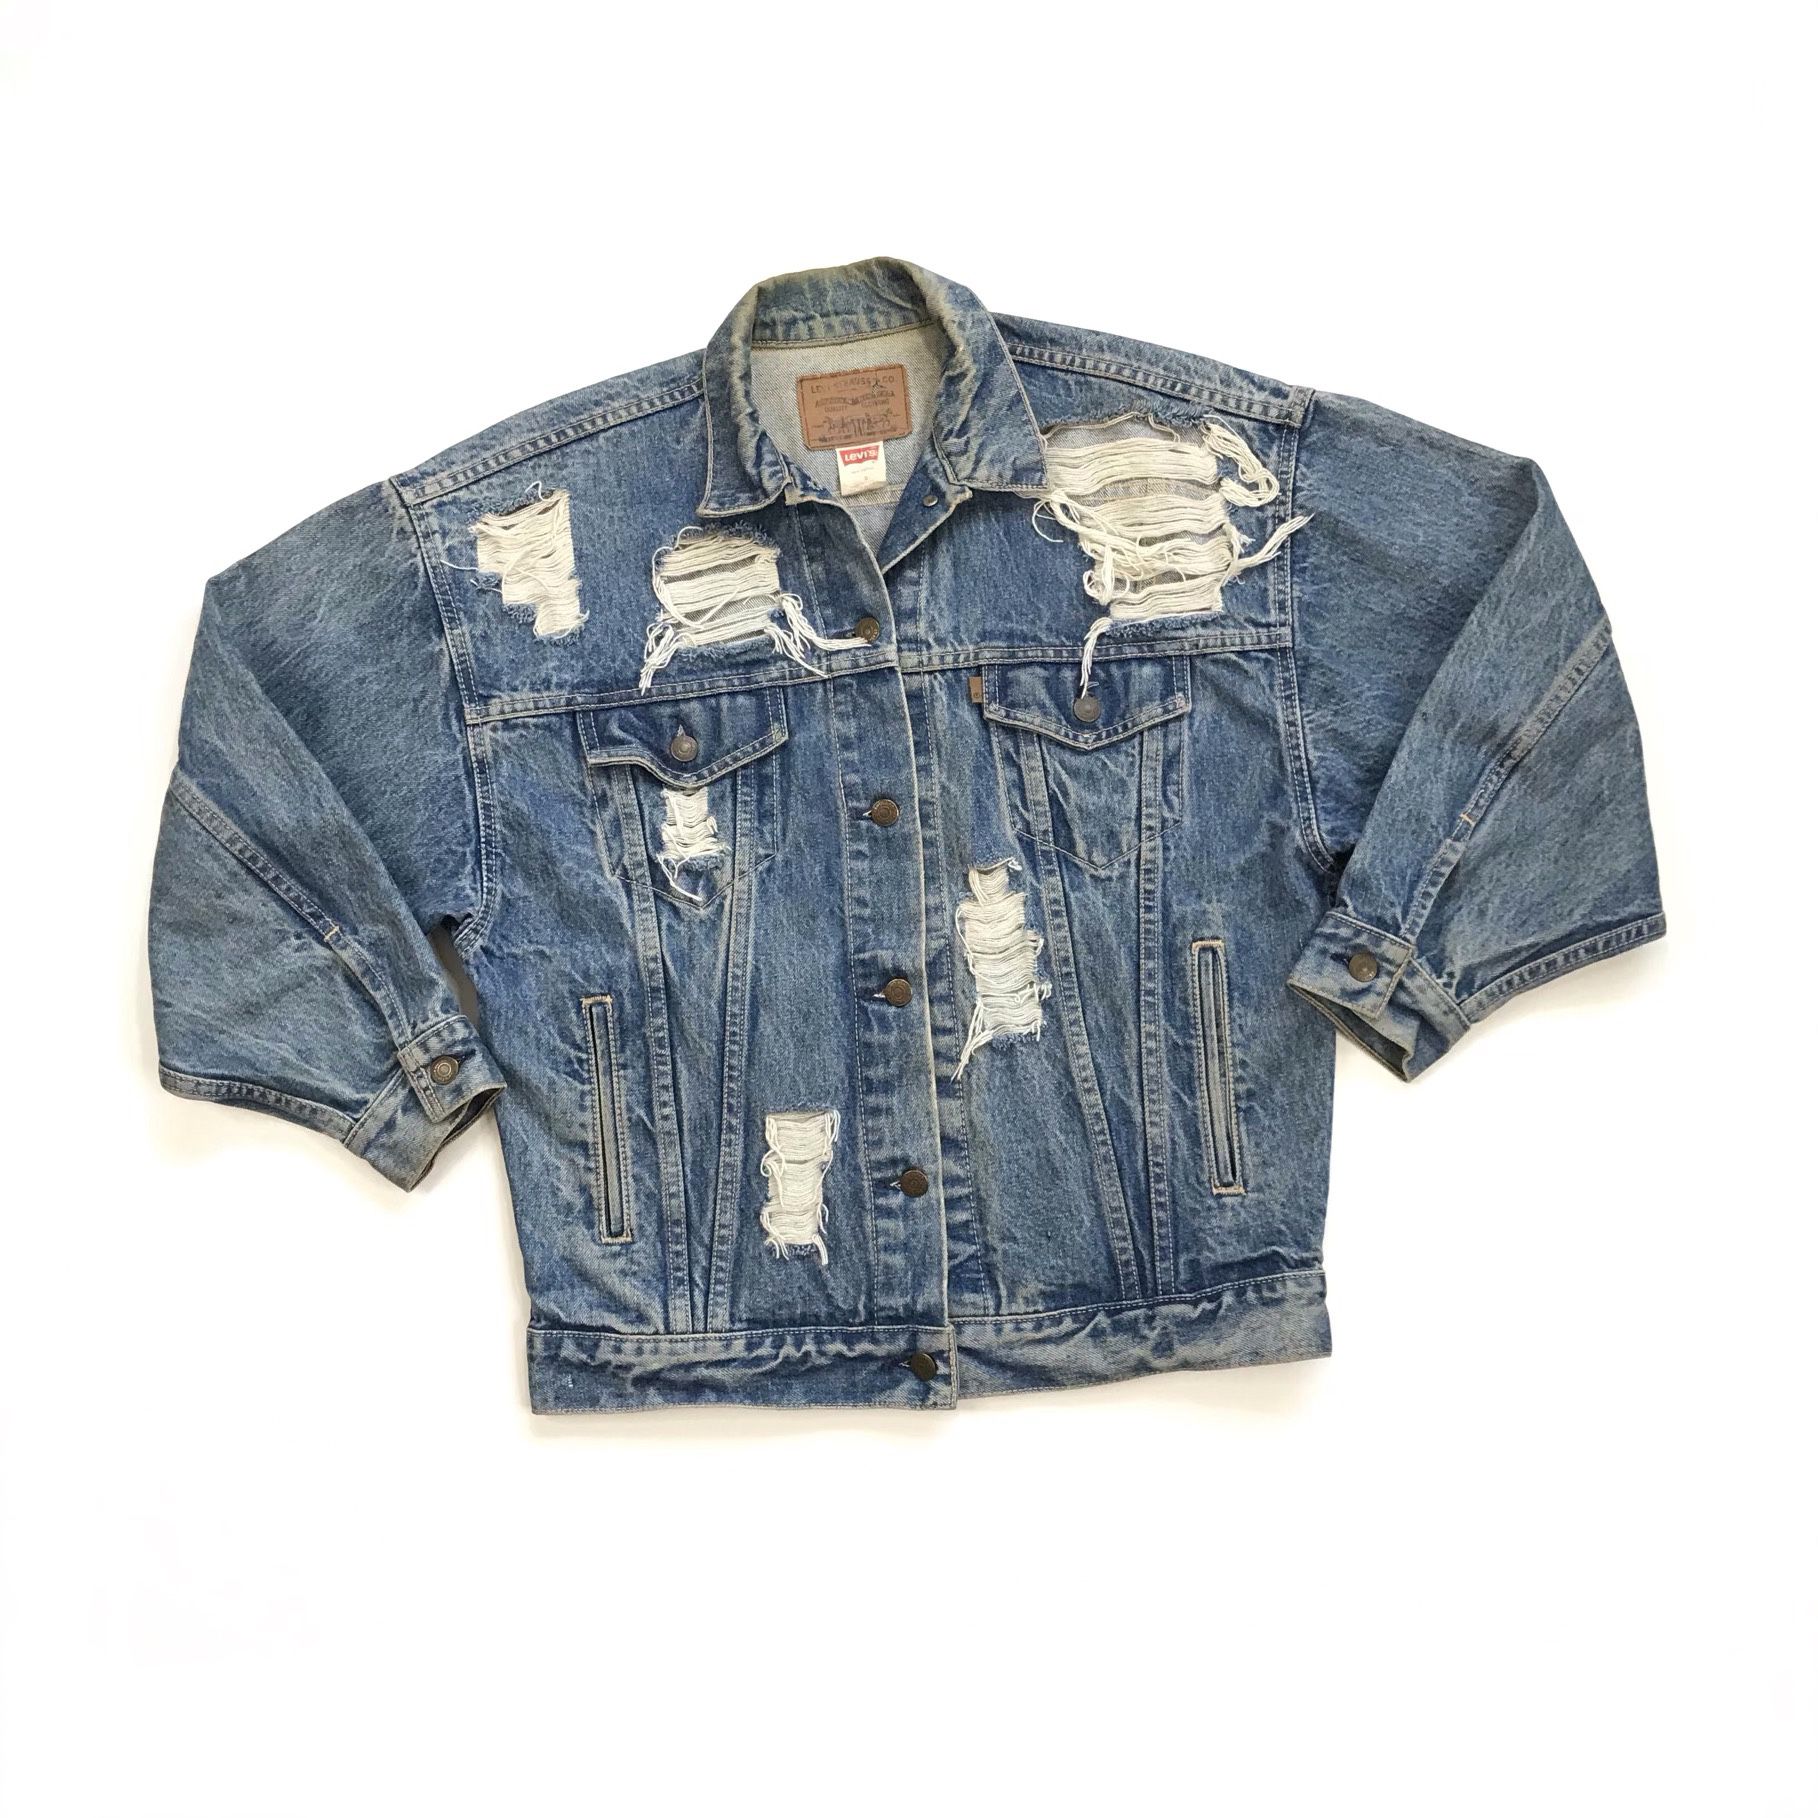 VINTAGE LEVIS DENIM JACKET SMALL S WOMENS BLUE DISTRESSED THRASHED MADE IN USA